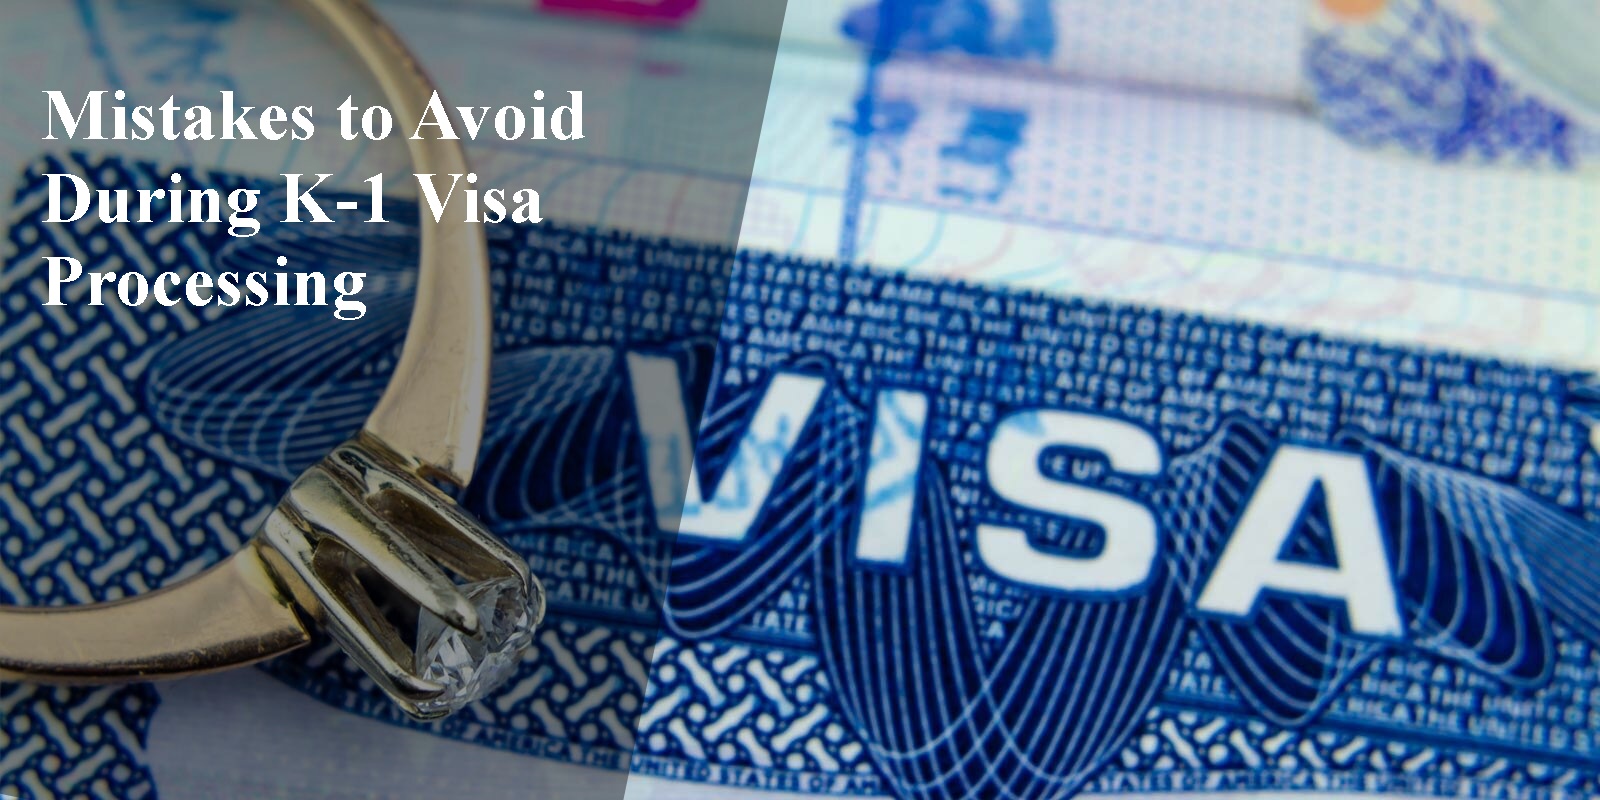 Mistakes To Avoid During K-1 Visa Processing